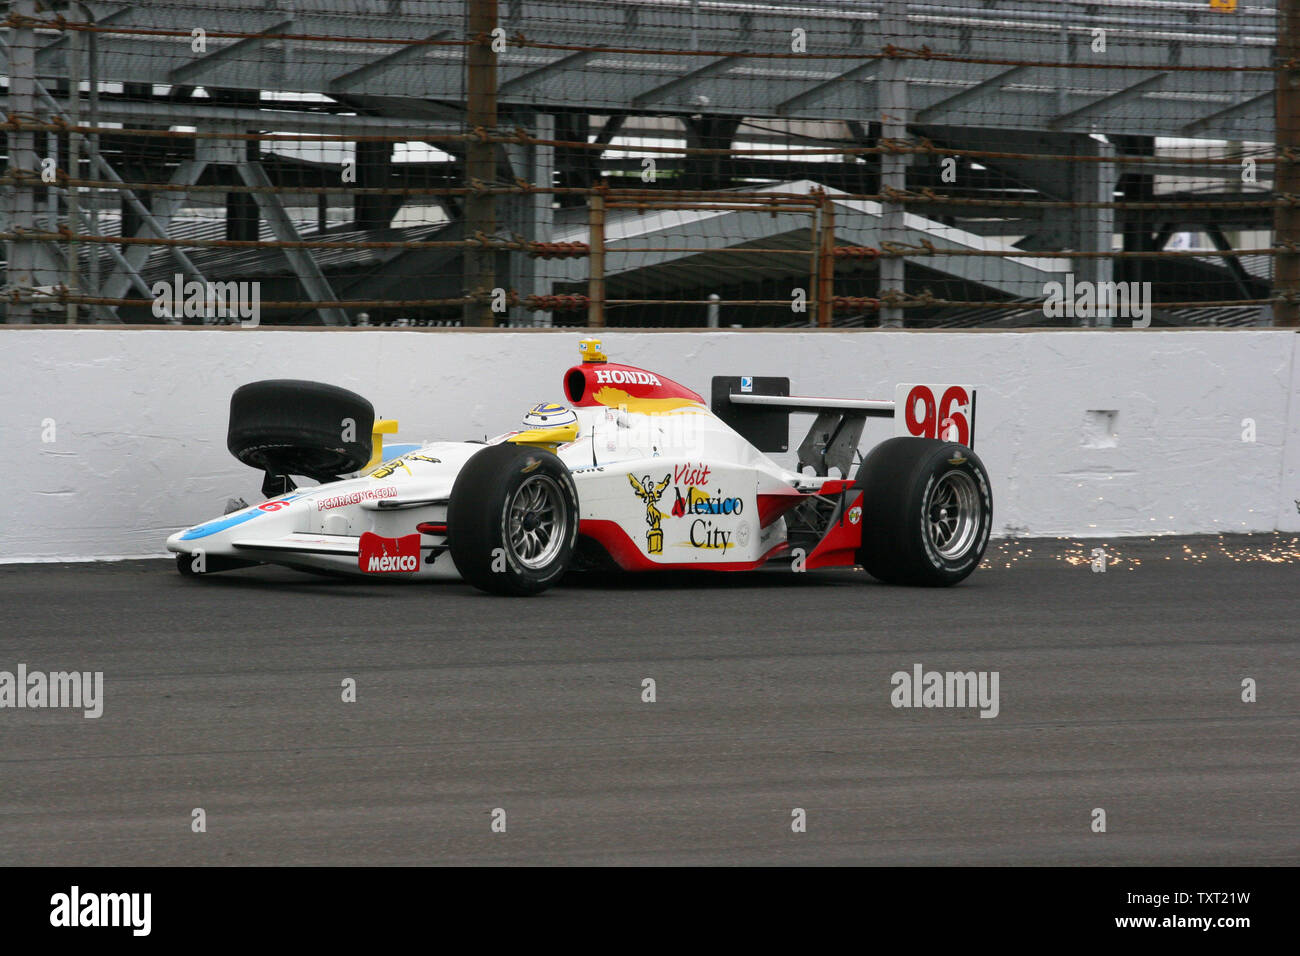 Rookie Mario Dominguez slides into the first turn wall knocking his right front wheel and suspension off on May 17, 2008 at the Indianapolis Motor Speedway in Indianapolis, Indiana. (UPI Photo/ Bill Coons) Stock Photo